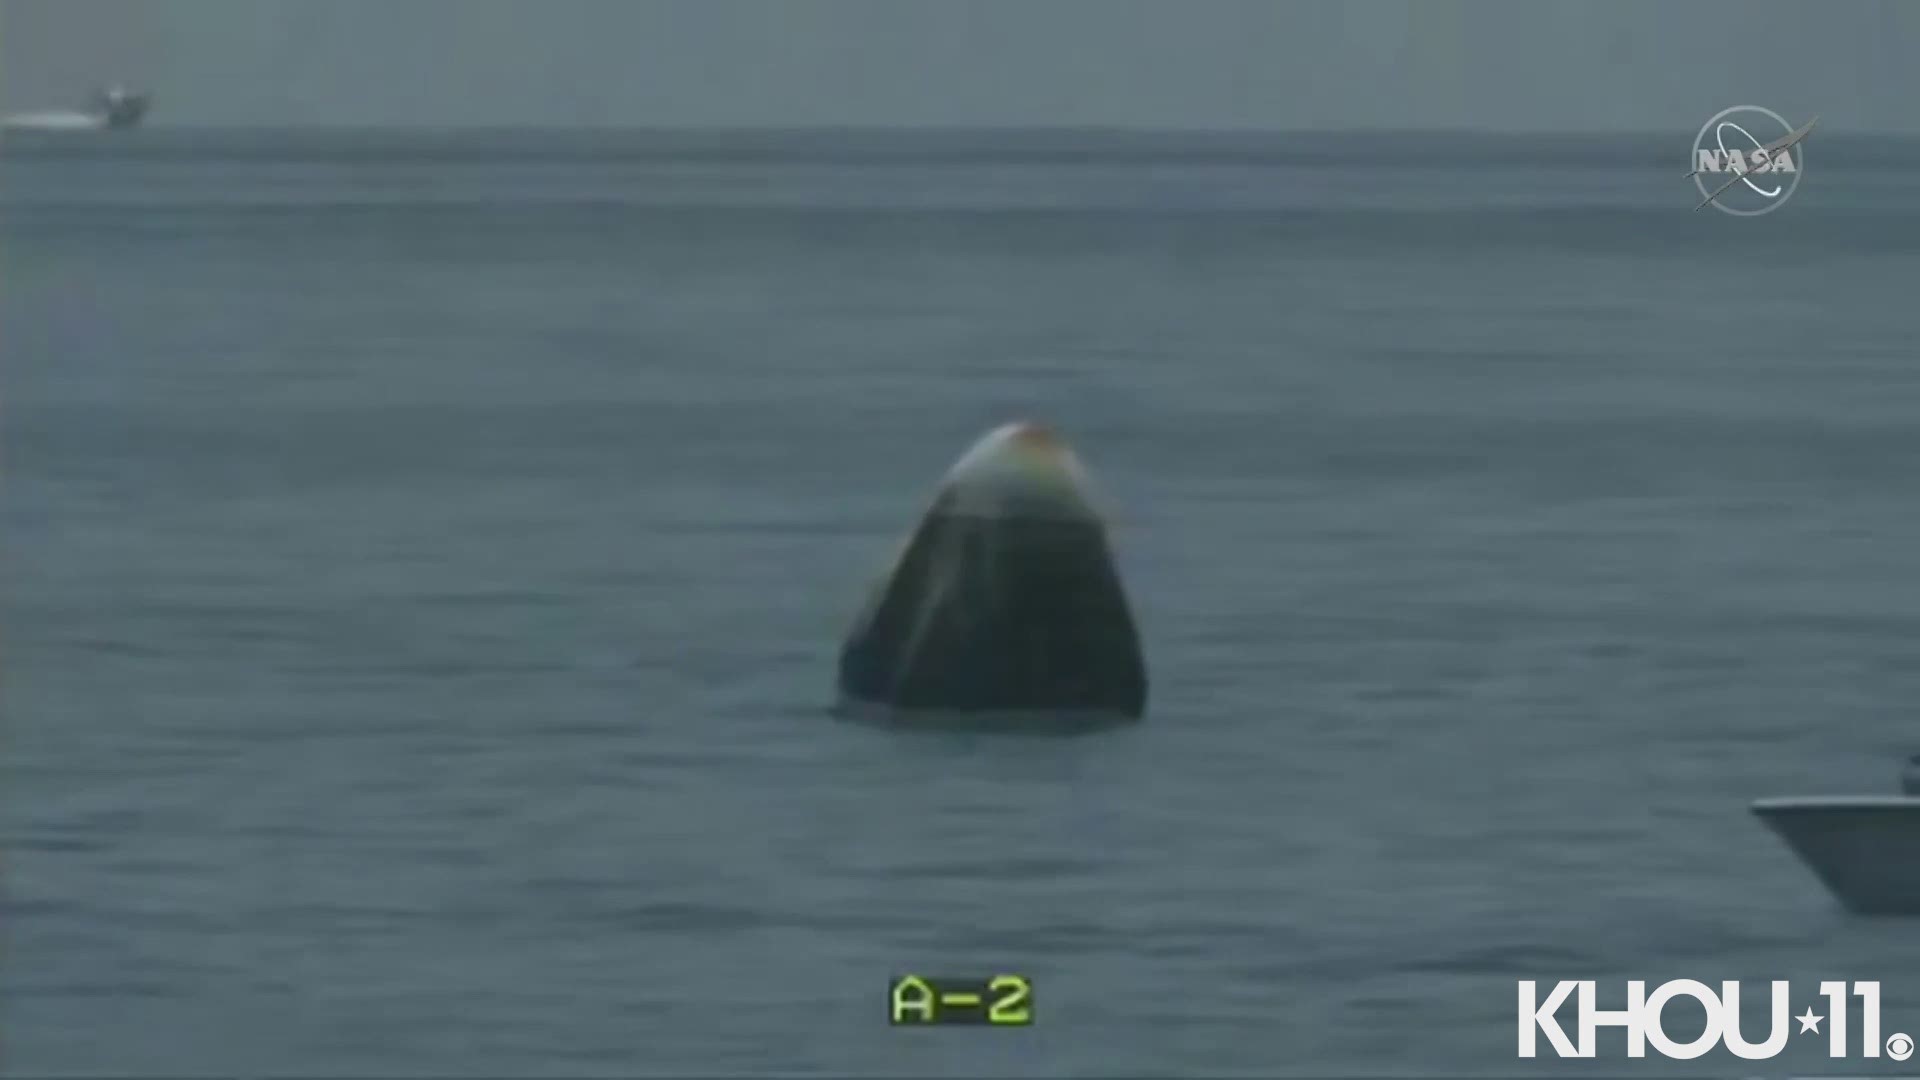 Here's something that wasn't exactly expected -- private boats surrounding the Crew Dragon capsule once it splashed down.